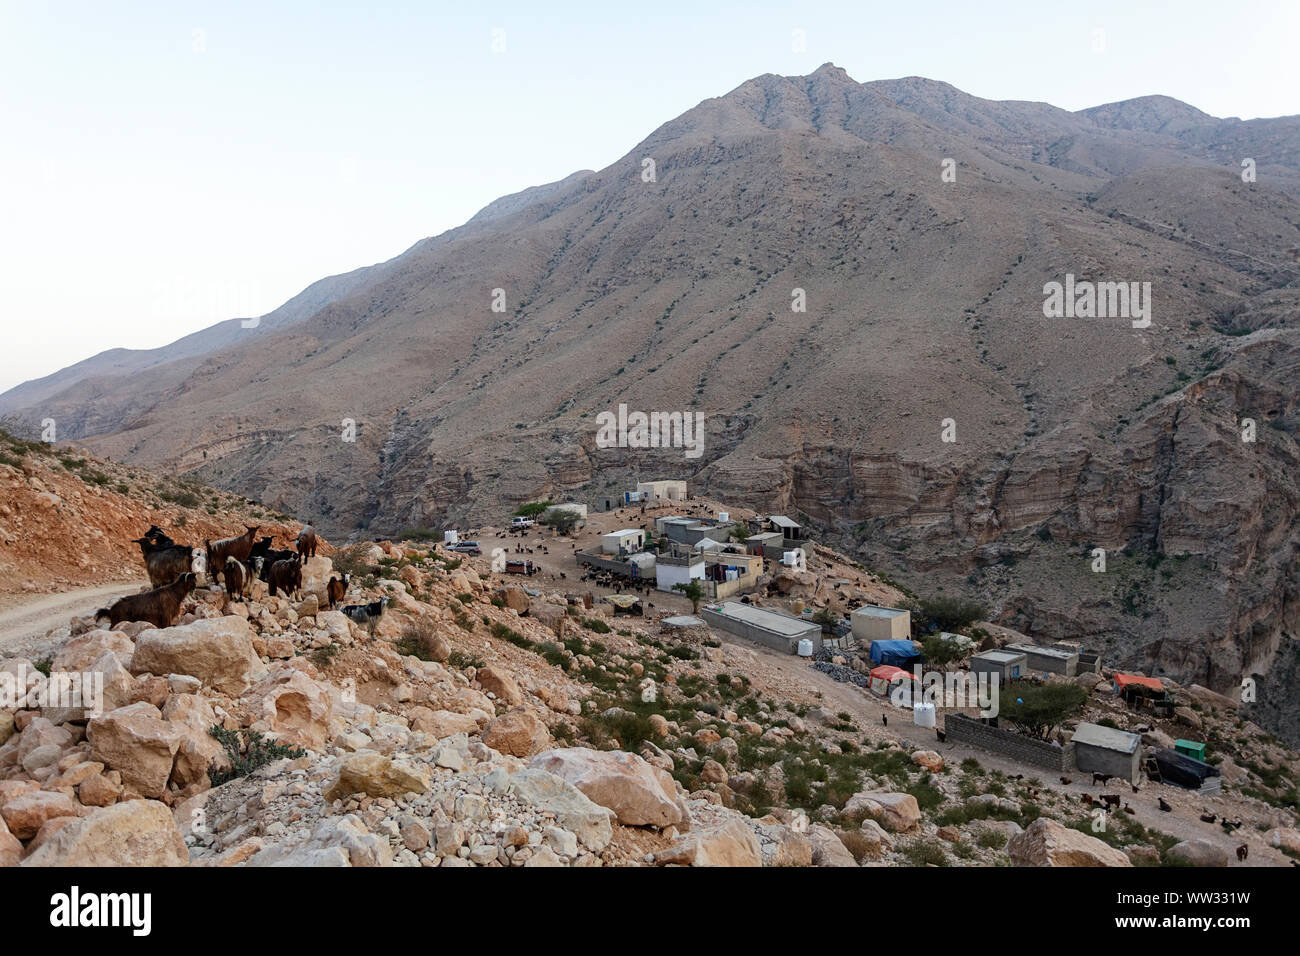 A herd of goats walking on a dirt road in a small mountain village, Oman Stock Photo